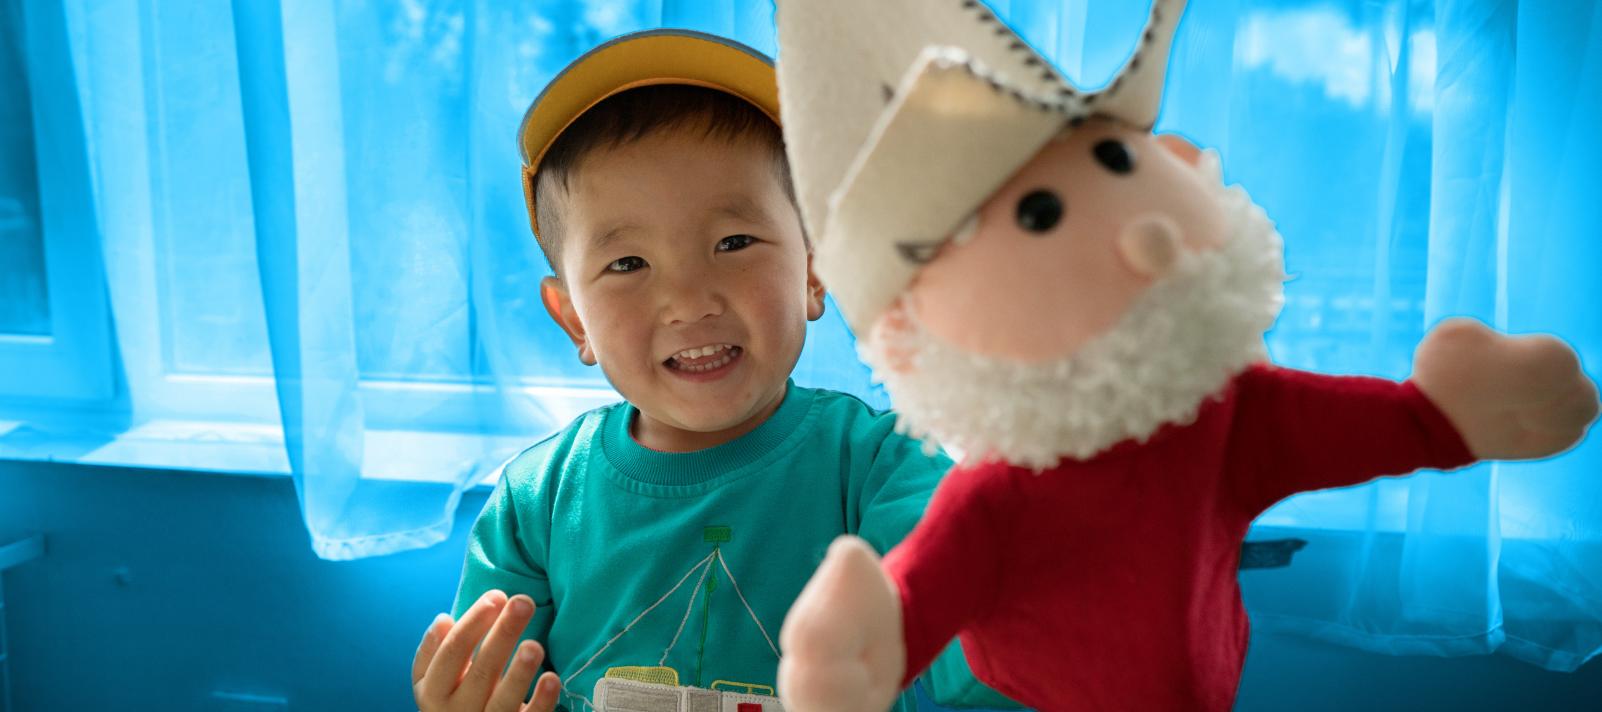 Smiling boy holds soft toy up to camera in Kyrgzstan.